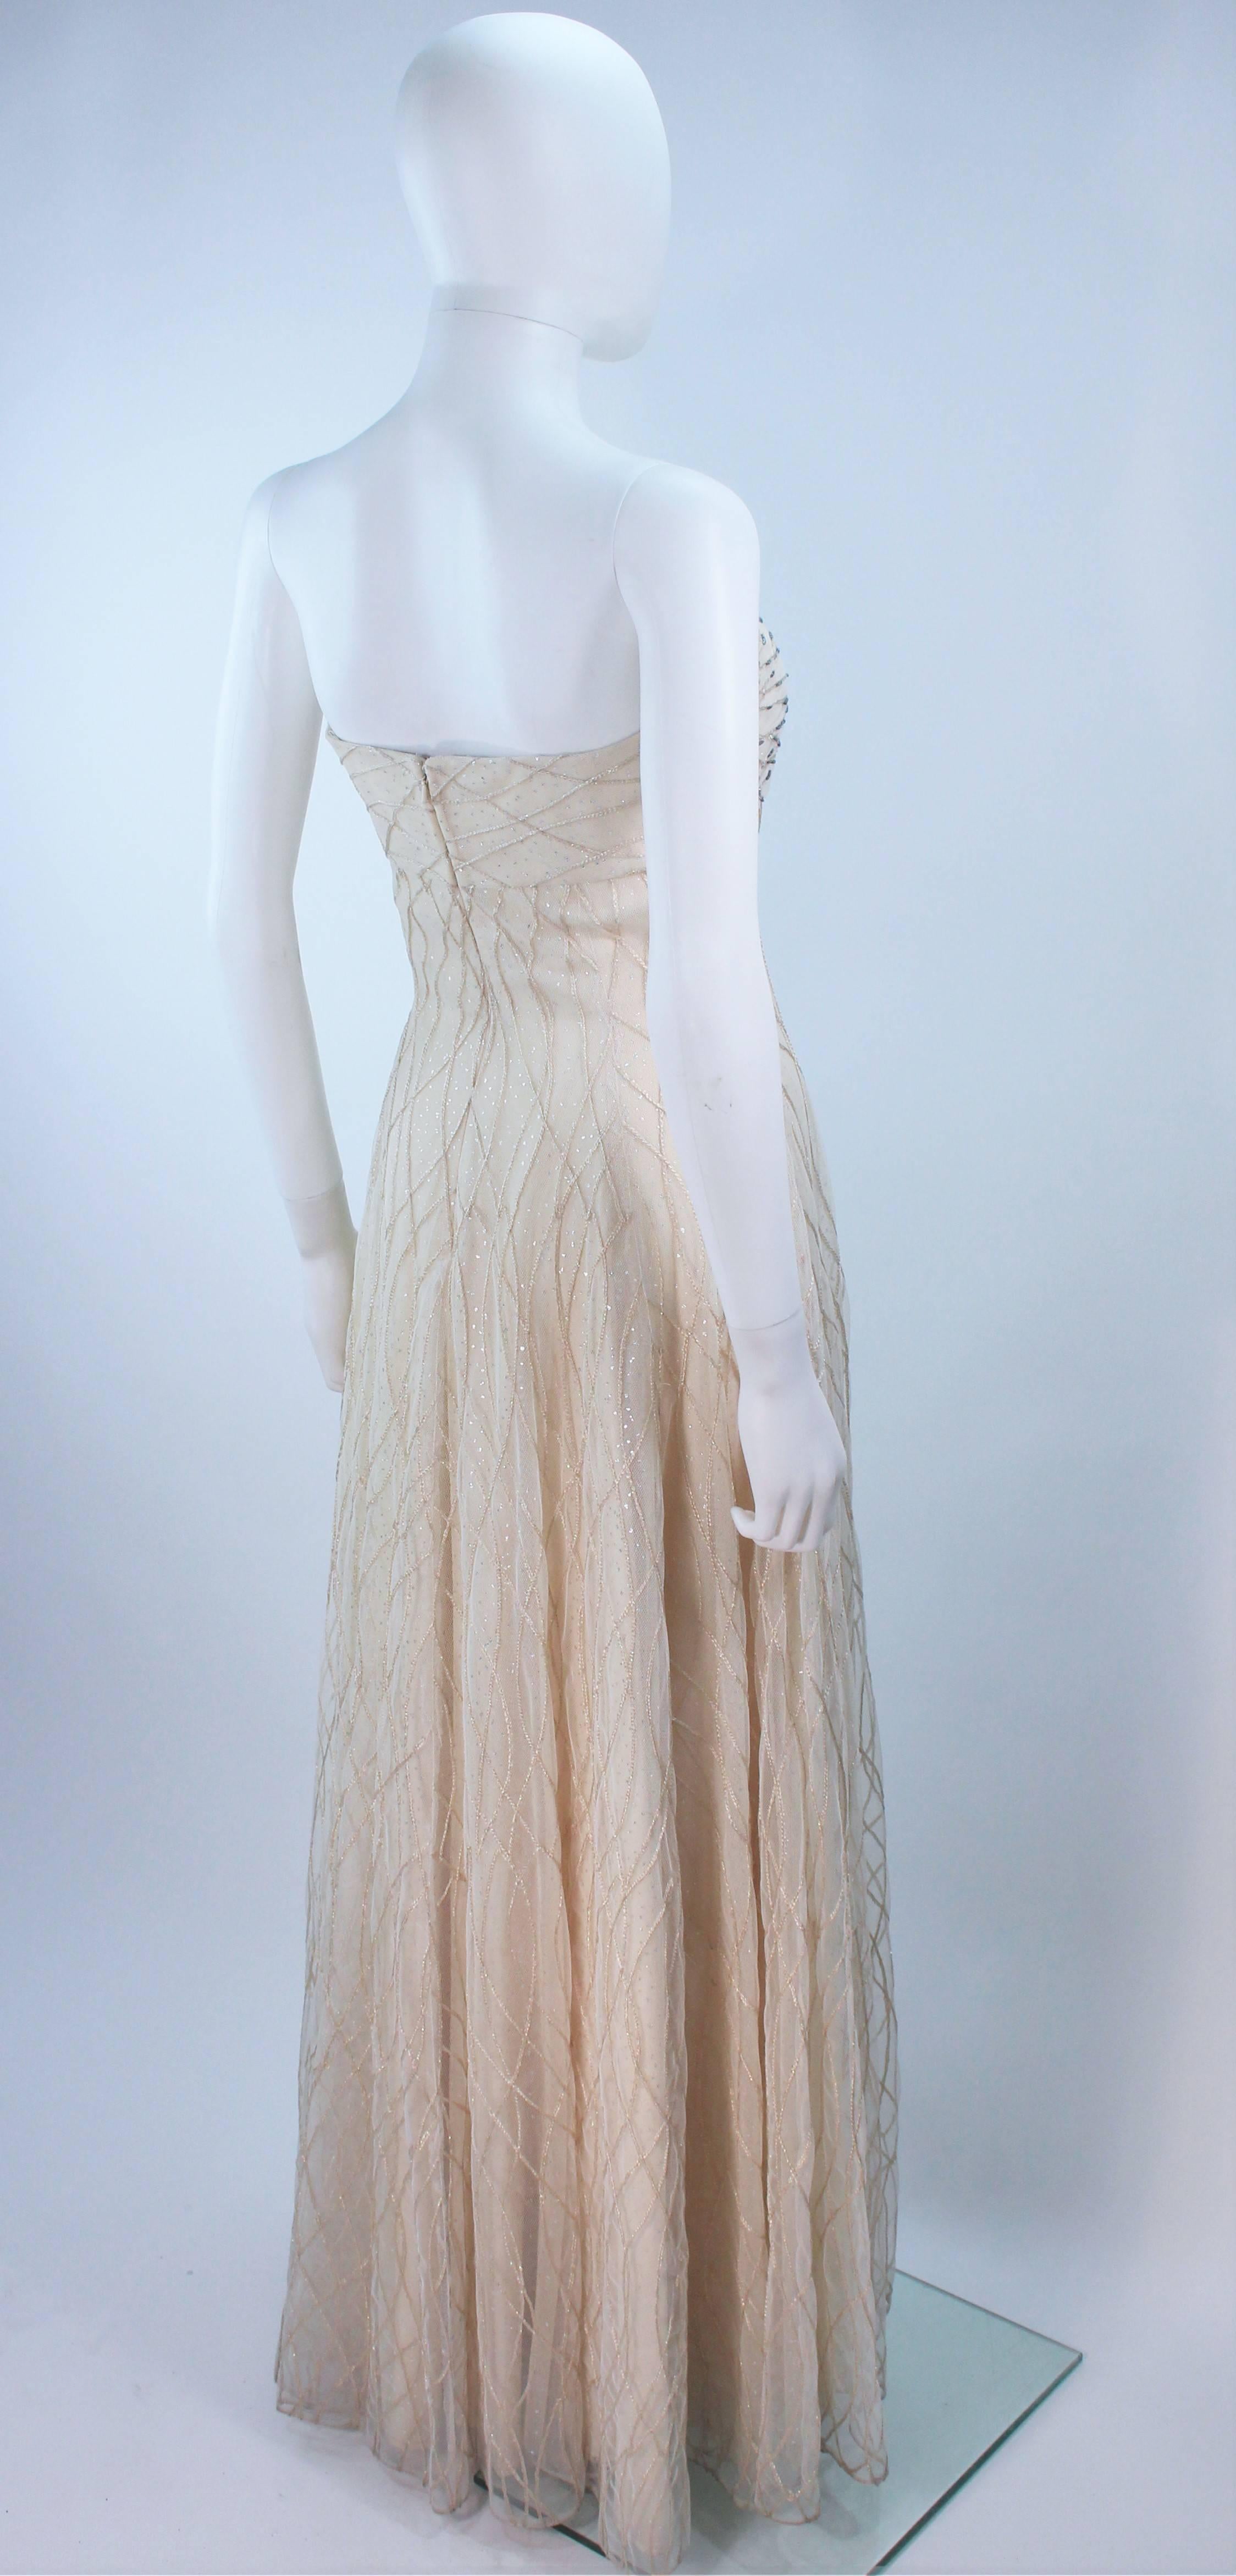  This Victor Costa  gown is composed of an off white layered mesh with iridescent cascading beaded applique. There is a center back zipper closure with interior boning and bra. In great vintage condition. 

  **Please cross-reference measurements